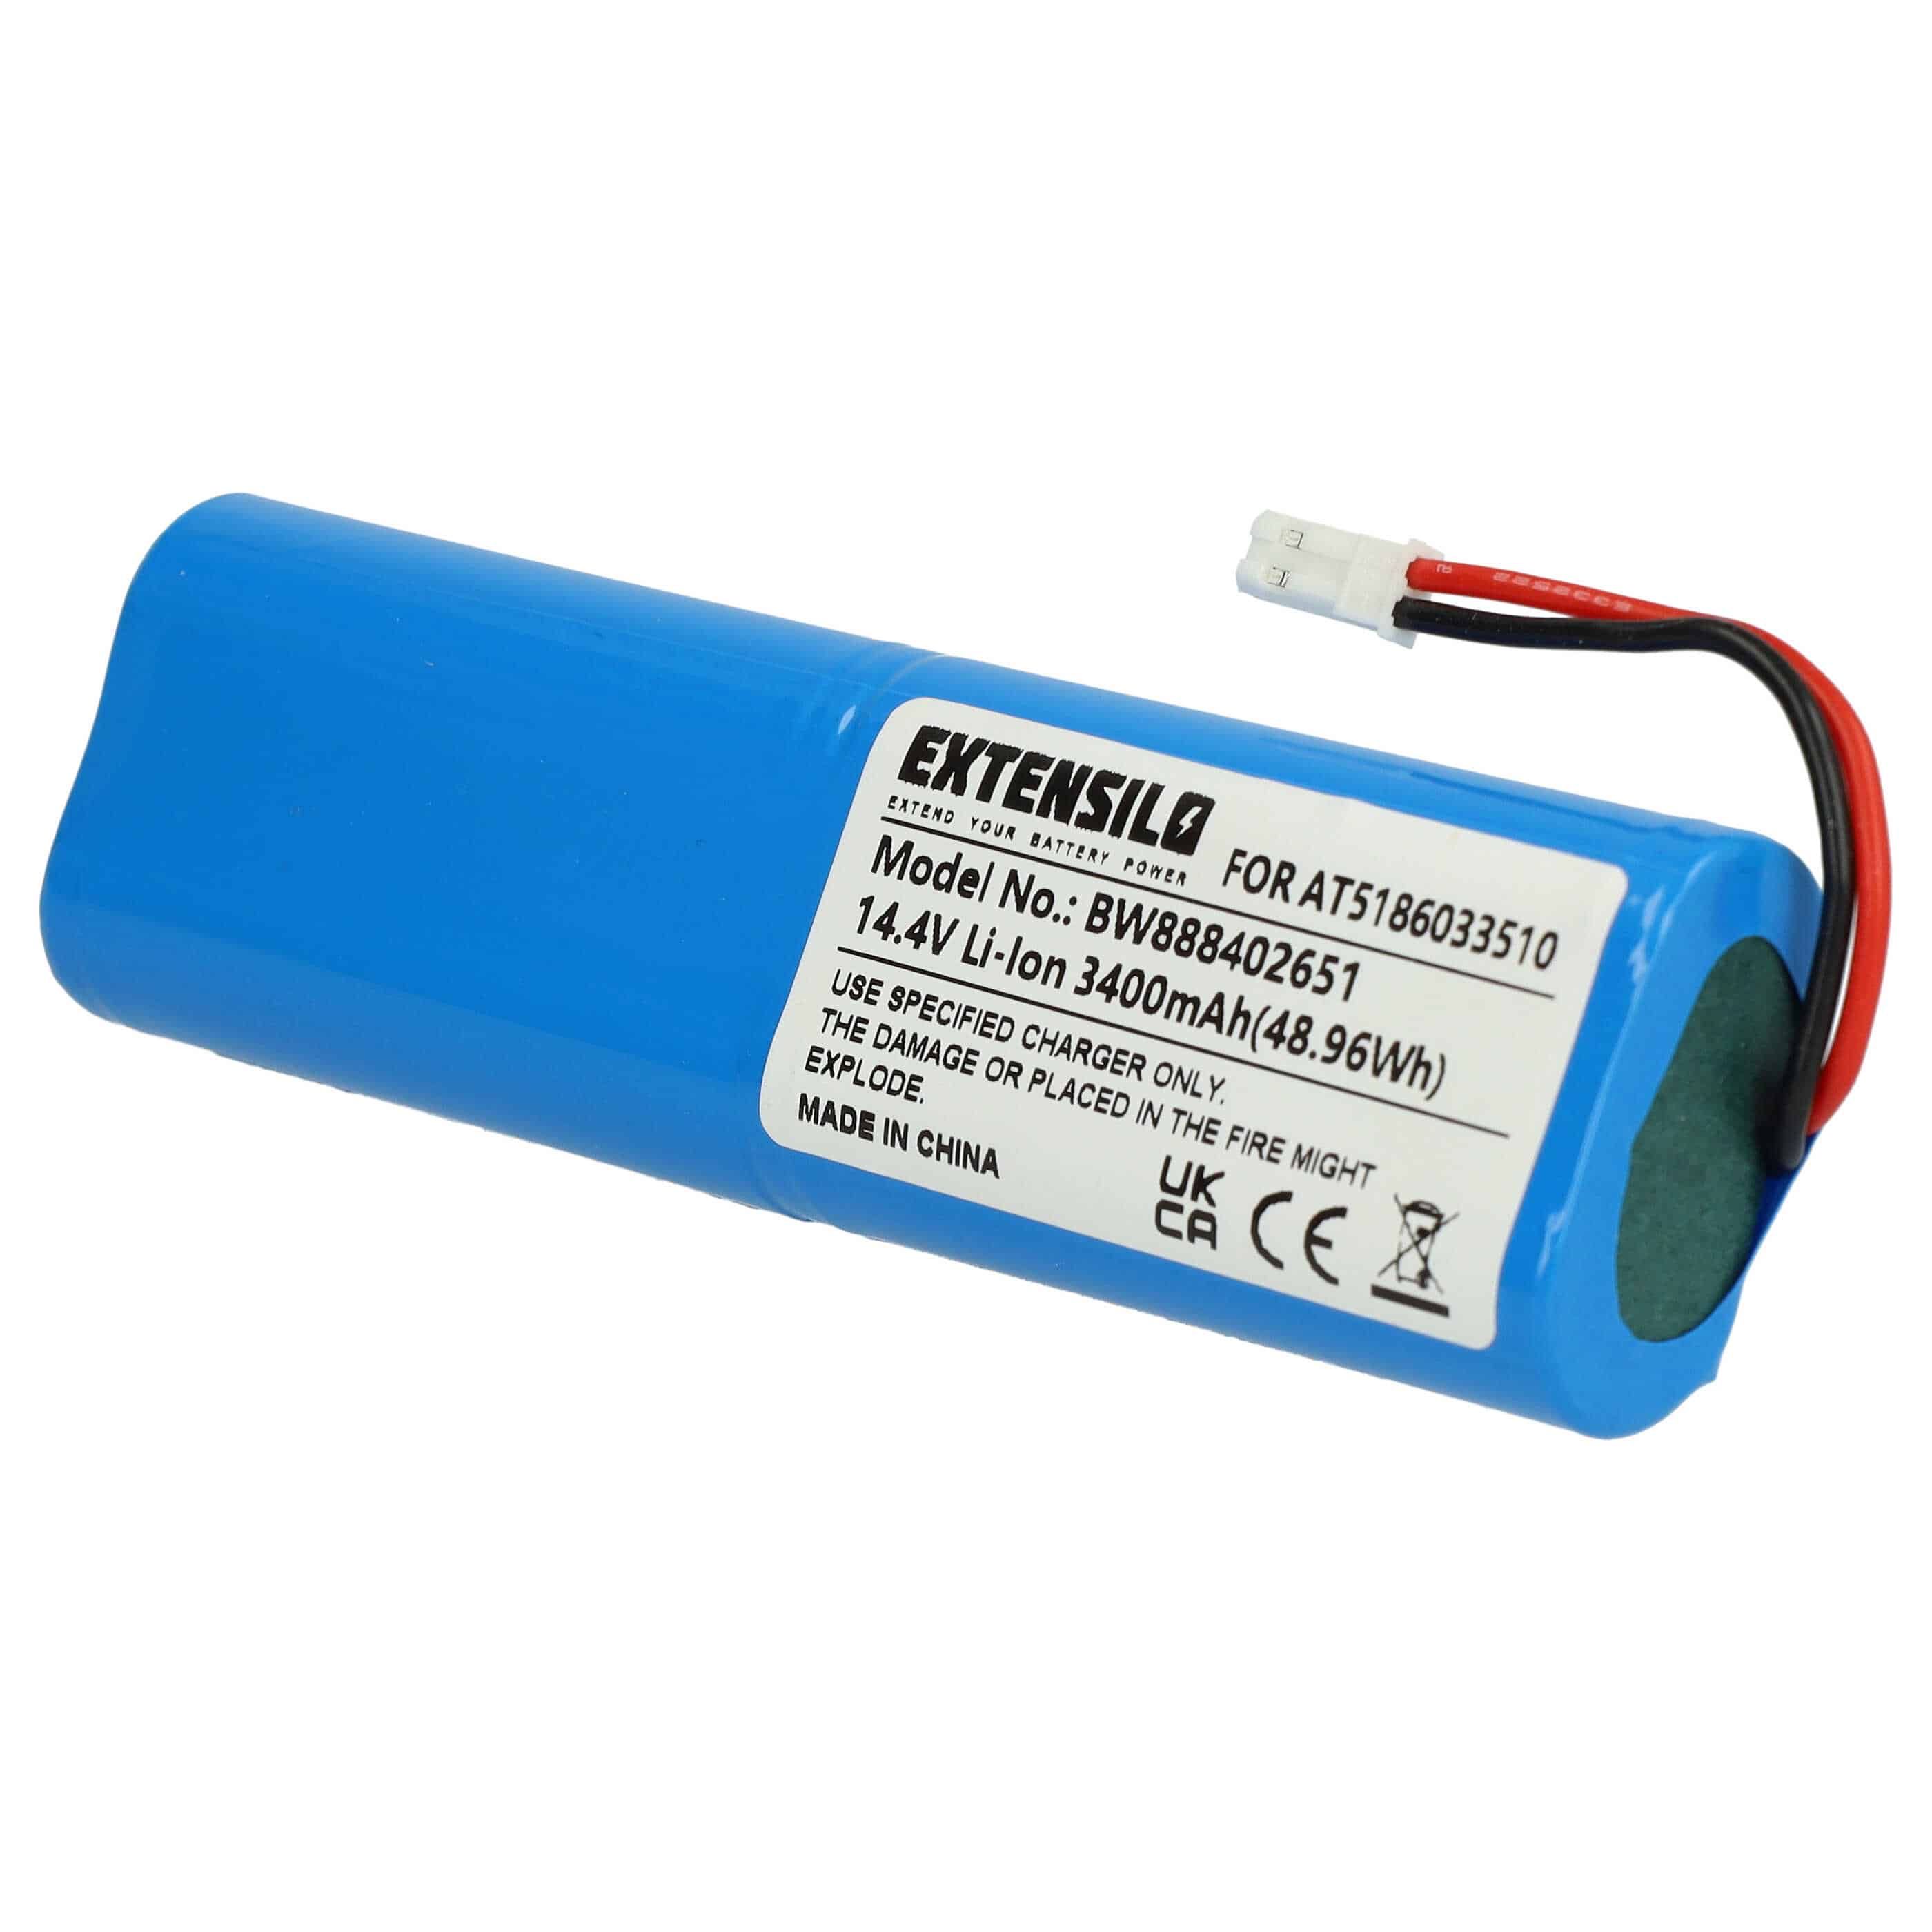 Battery Replacement for Ariete AT5186033510 for - 3400mAh, 14.4V, Li-Ion